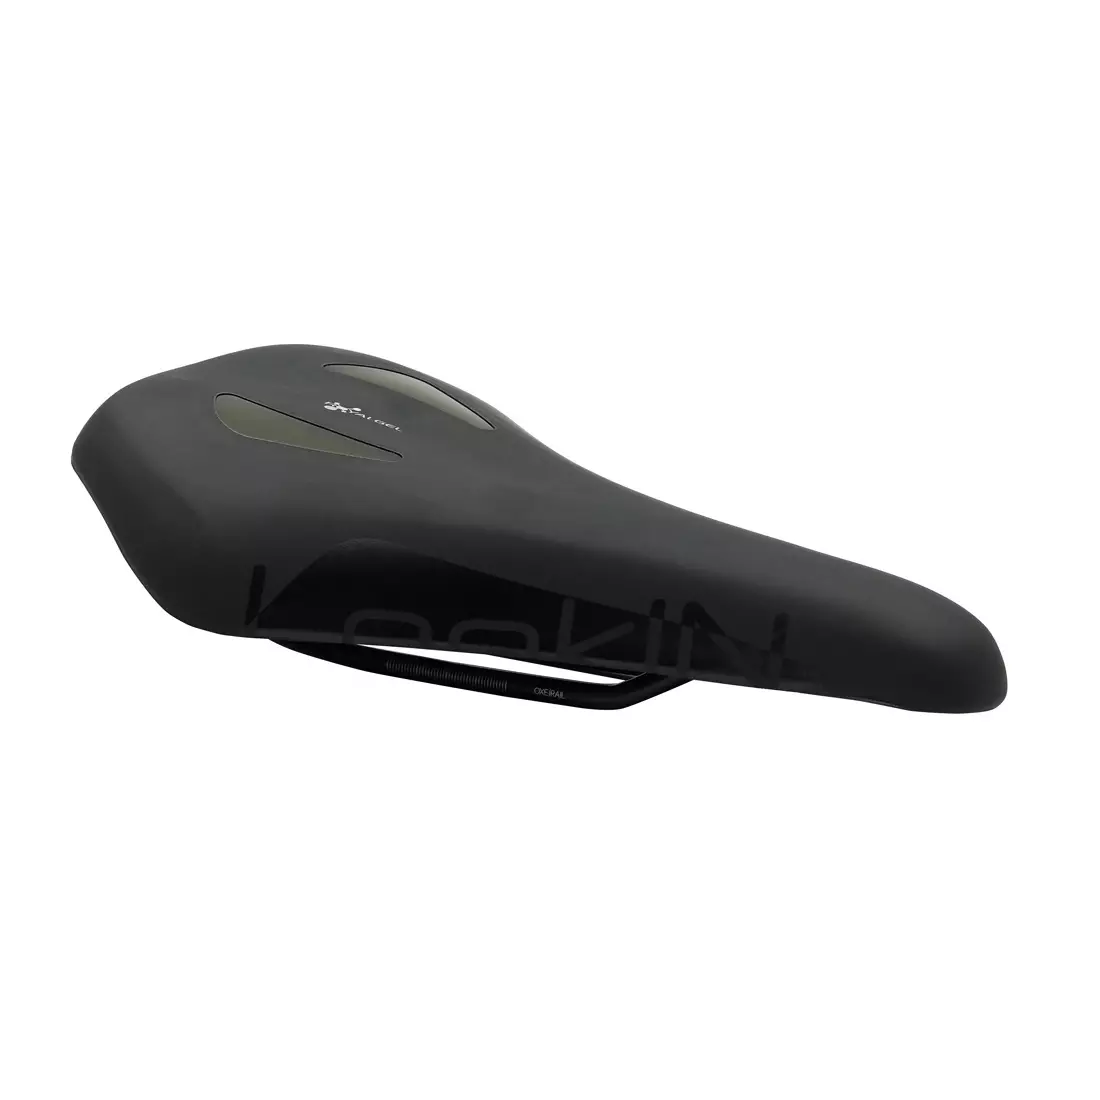 SELLEROYAL bicycle saddle lookin basic moderate gel SR-A237HR0A08014